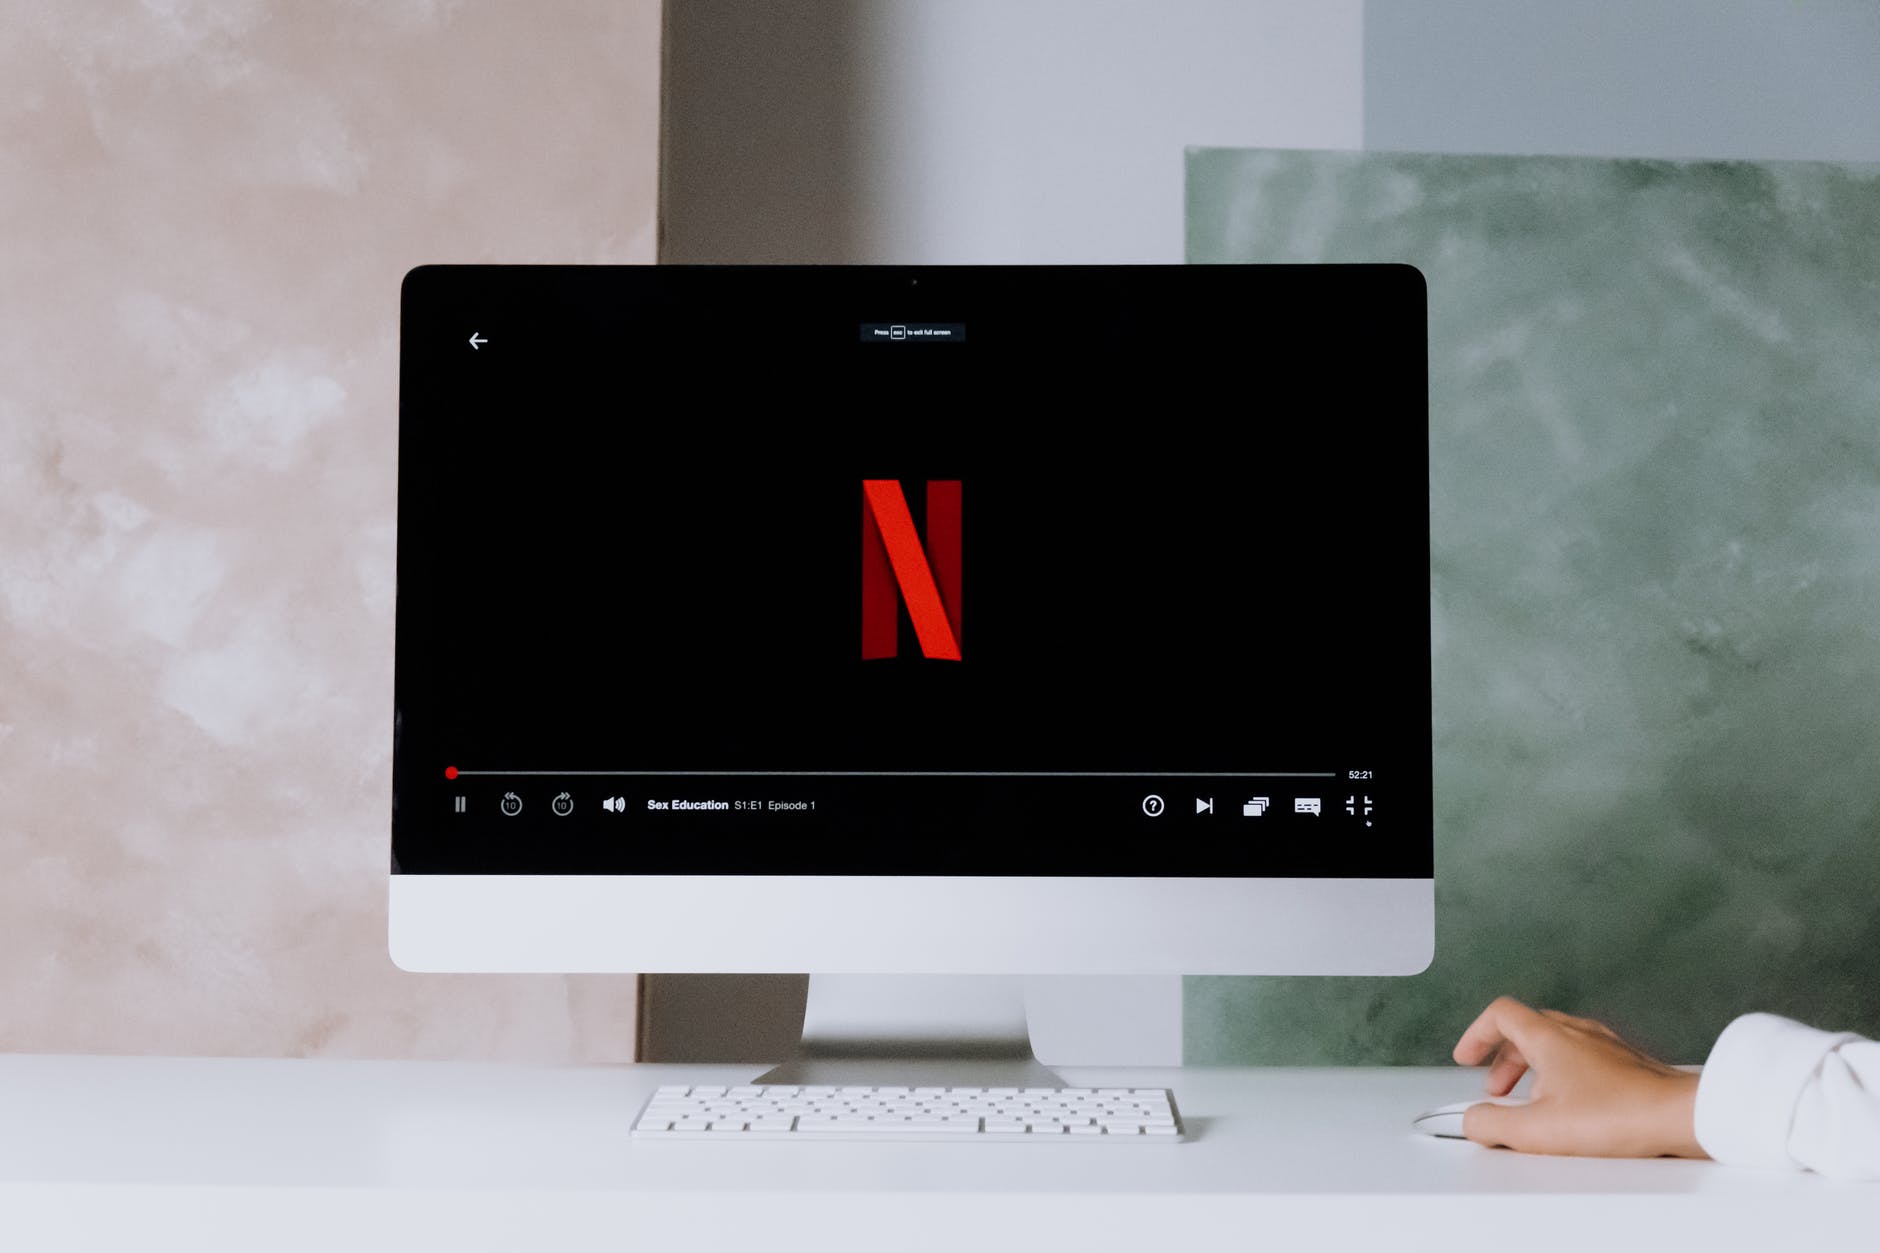 Top 5 Streaming Sites to Watch Movies in 2021